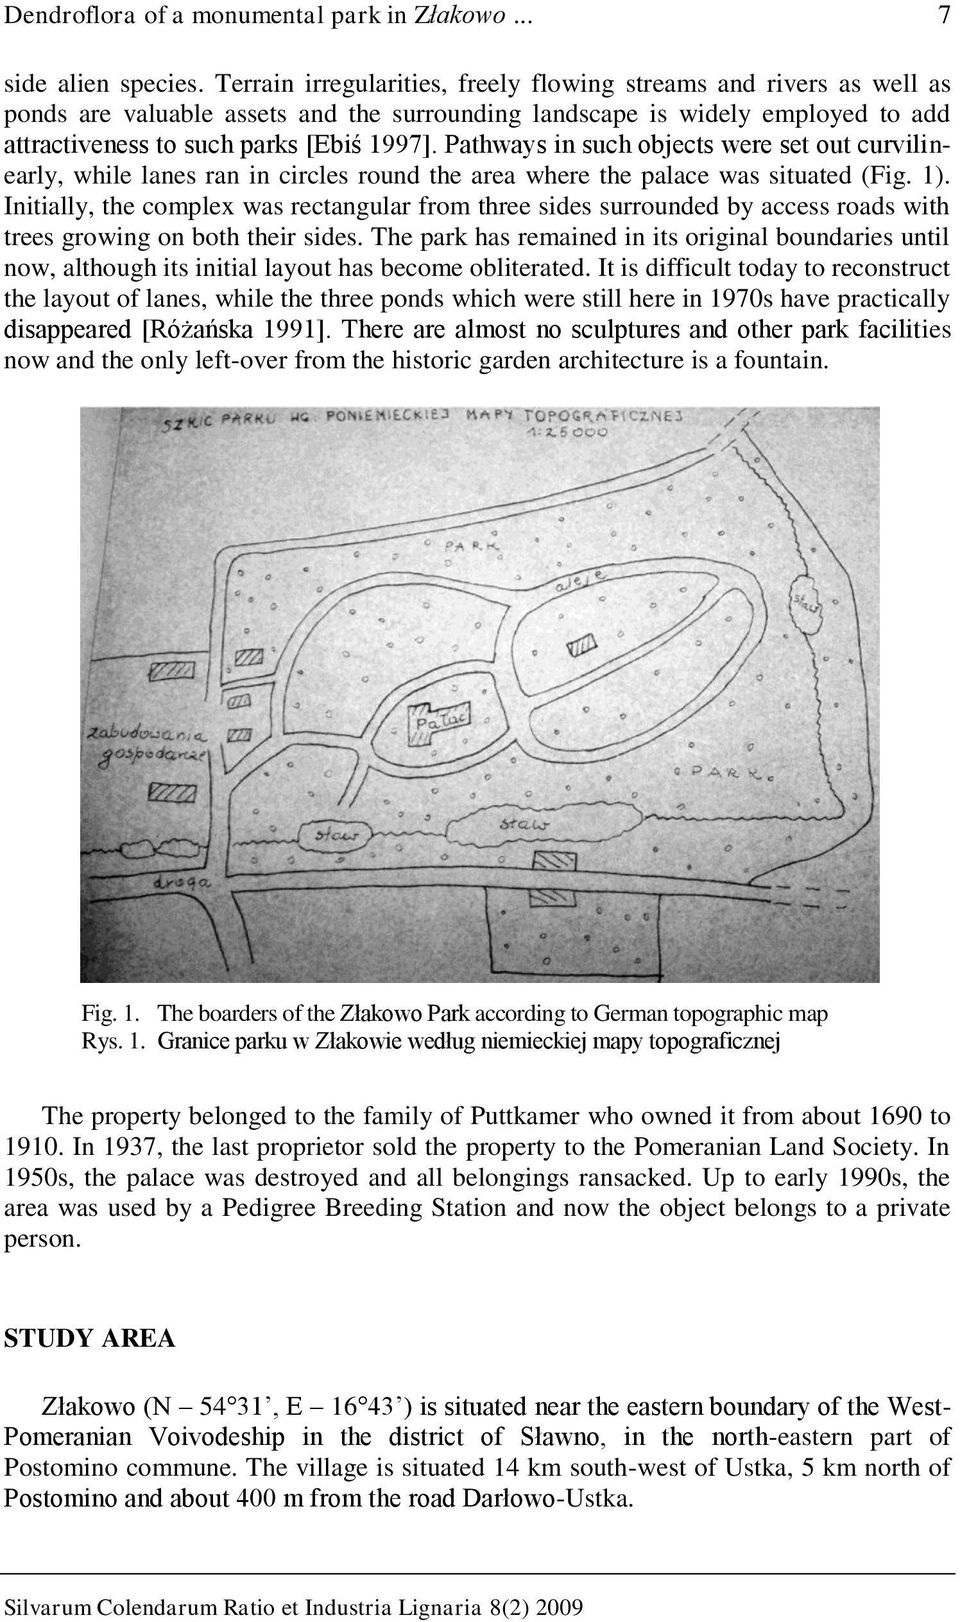 Pathways in such objects were set out curvilinearly, while lanes ran in circles round the area where the palace was situated (Fig. 1).